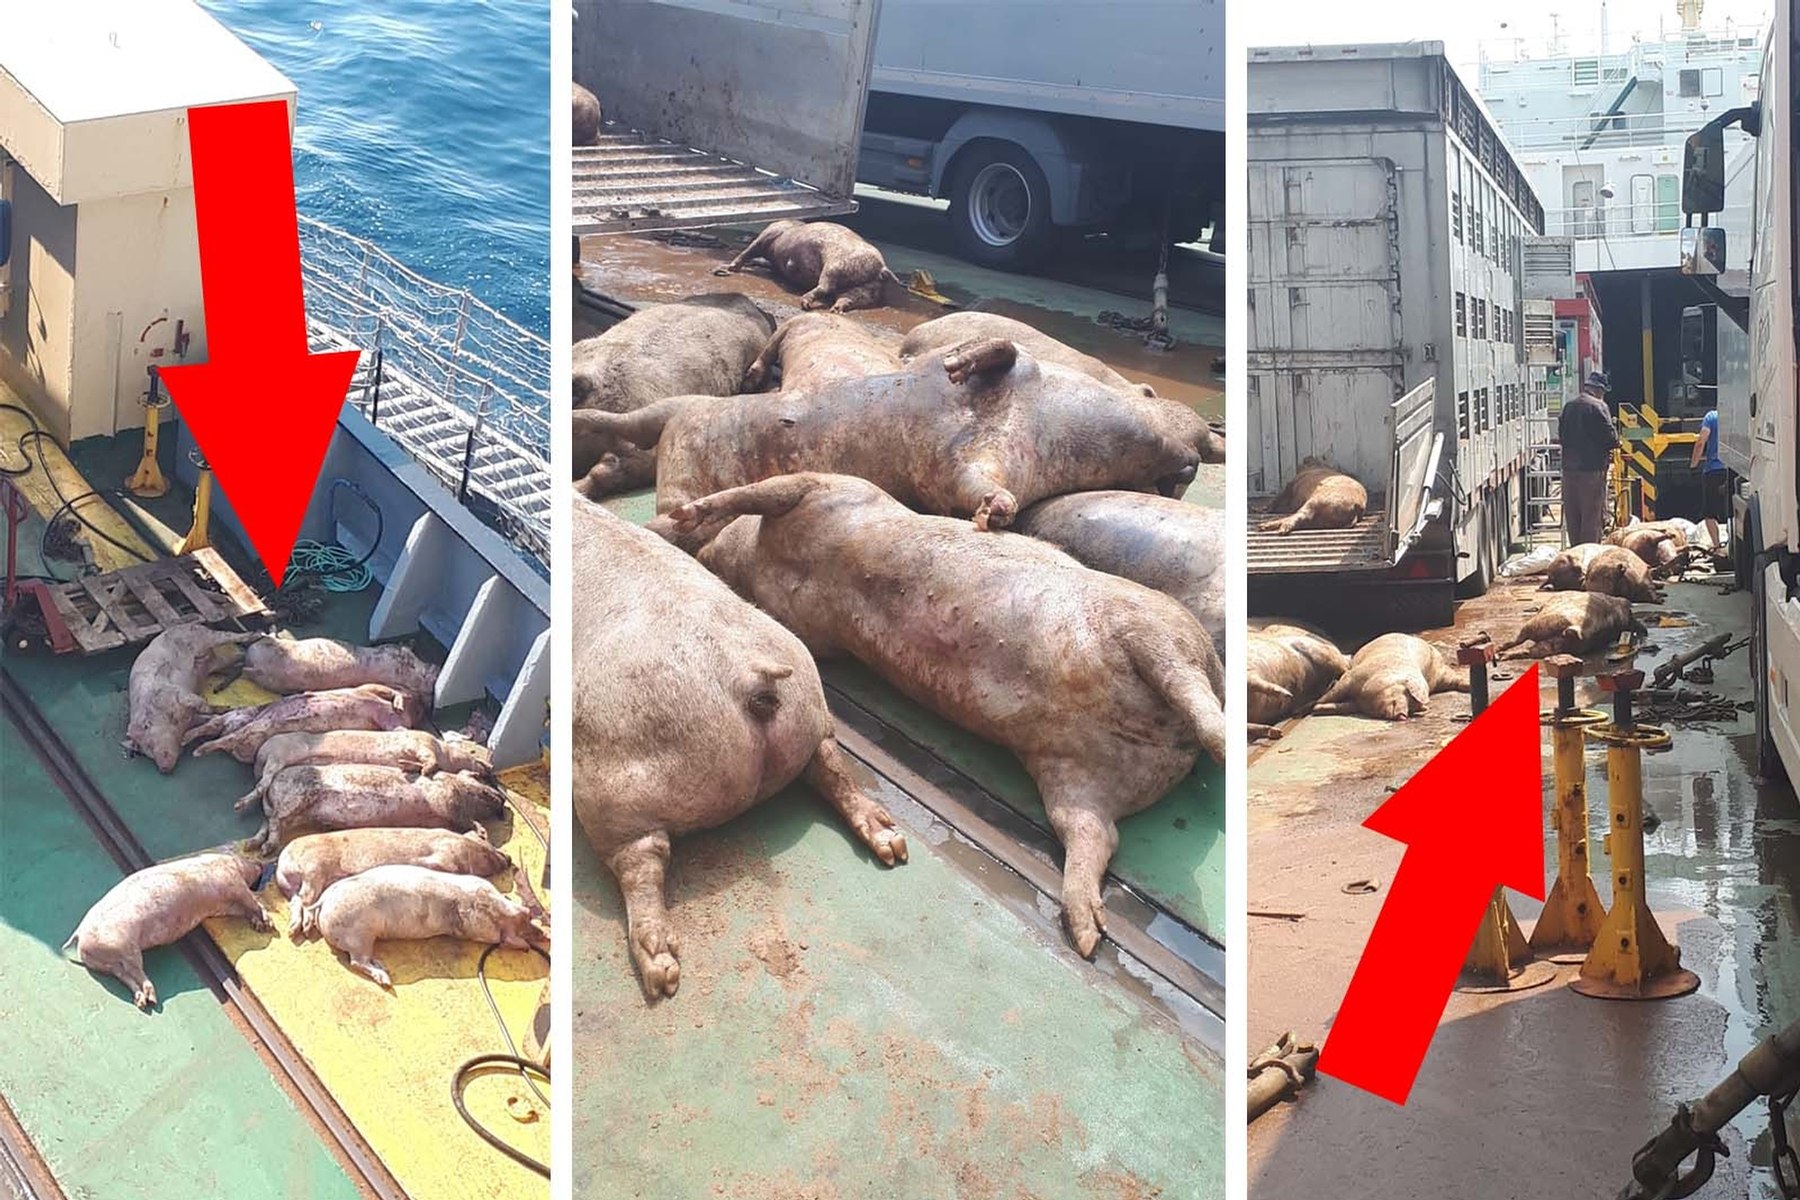 Animal Transport Horror: 40 Pigs Thrown Into the Sea